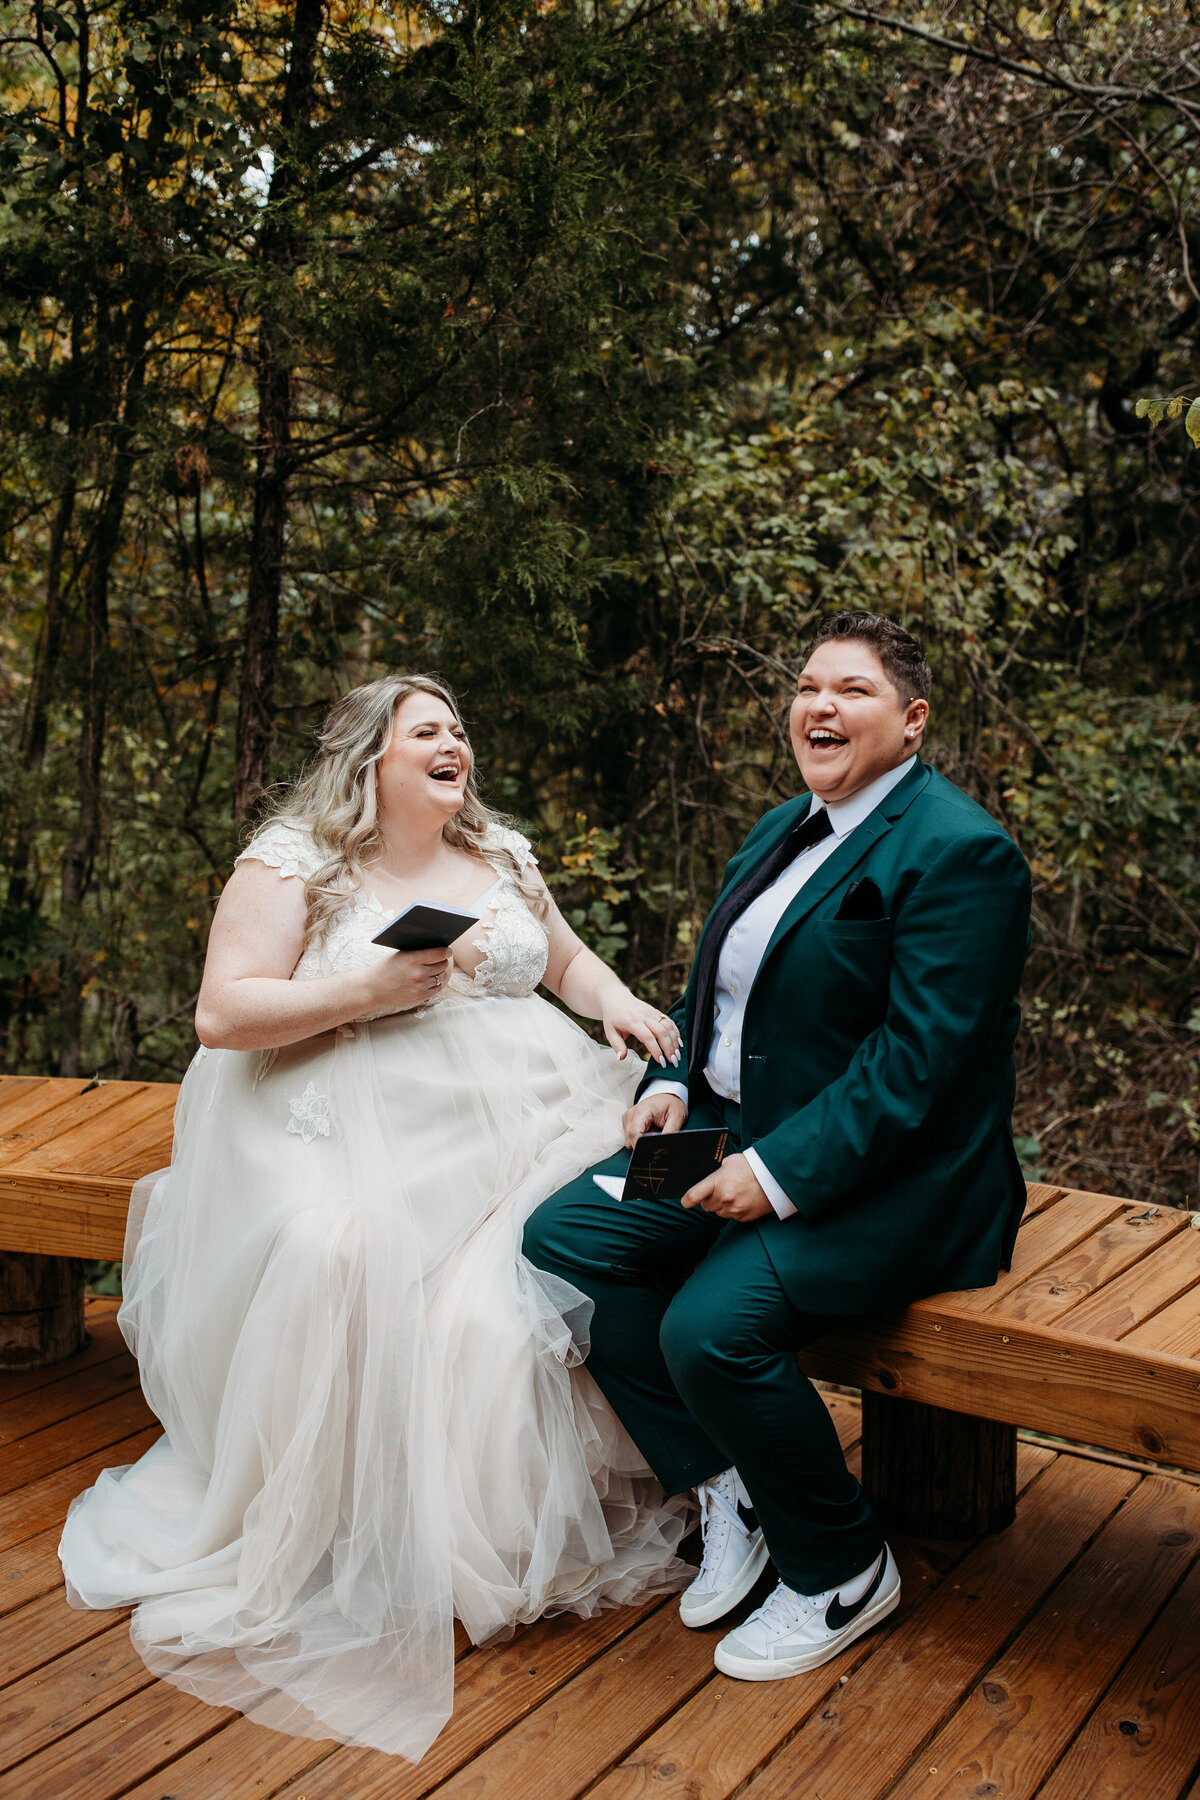 Two brides sharing a laugh while sitting on a wooden bench in a forested area